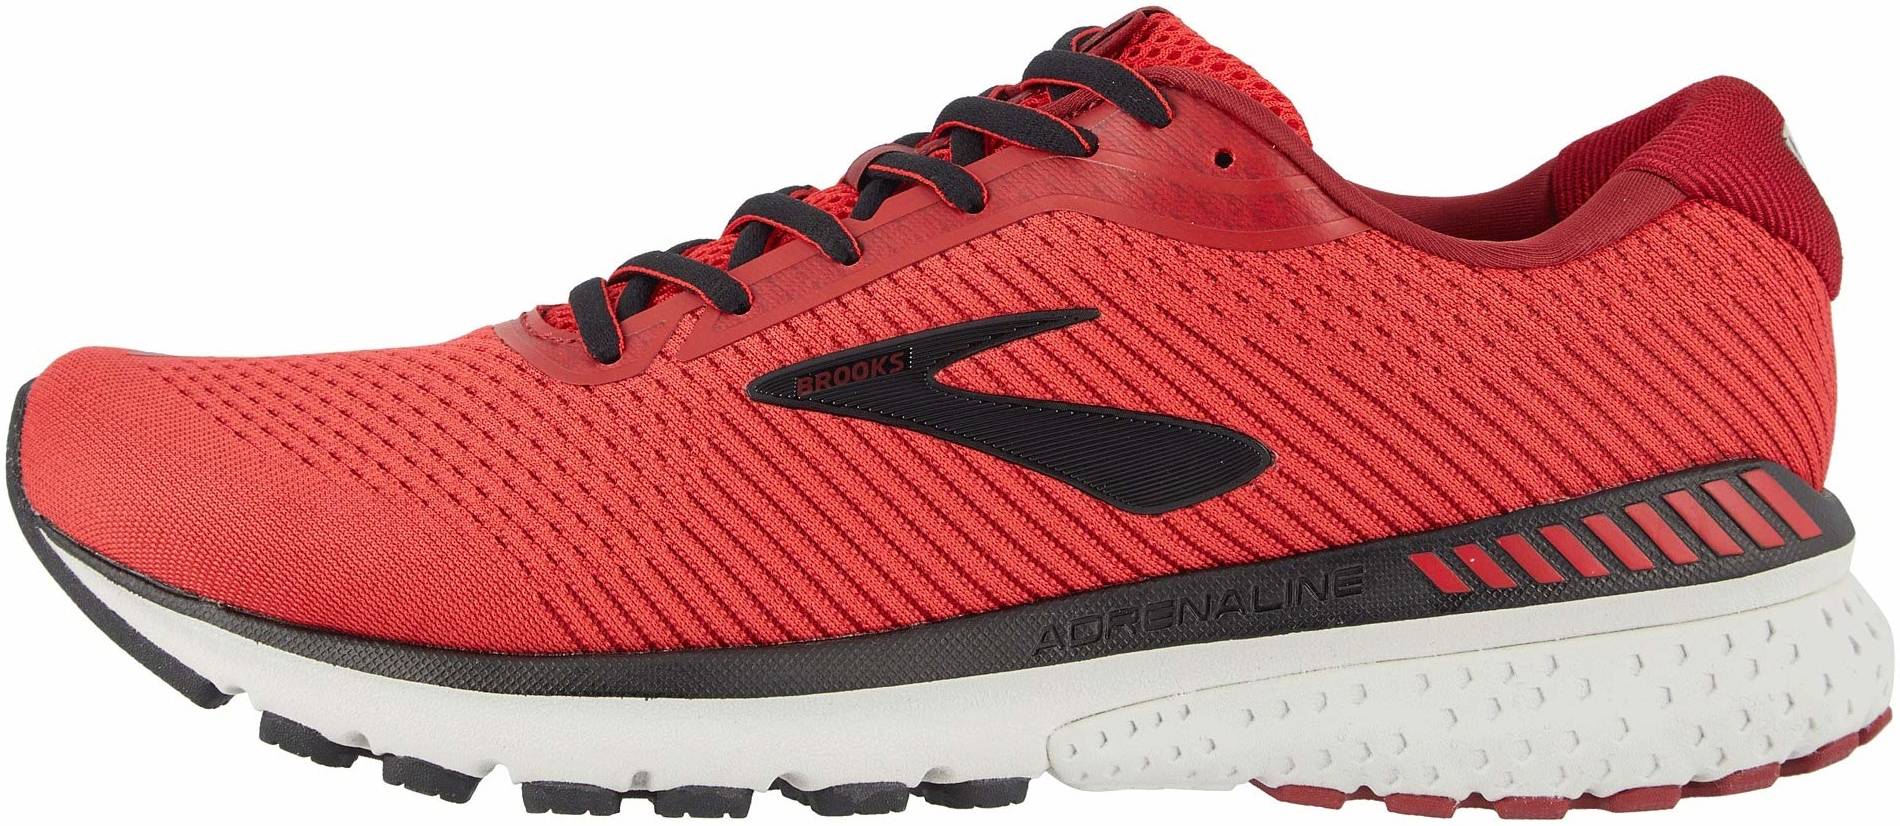 Save 36% on Red Running Shoes (244 